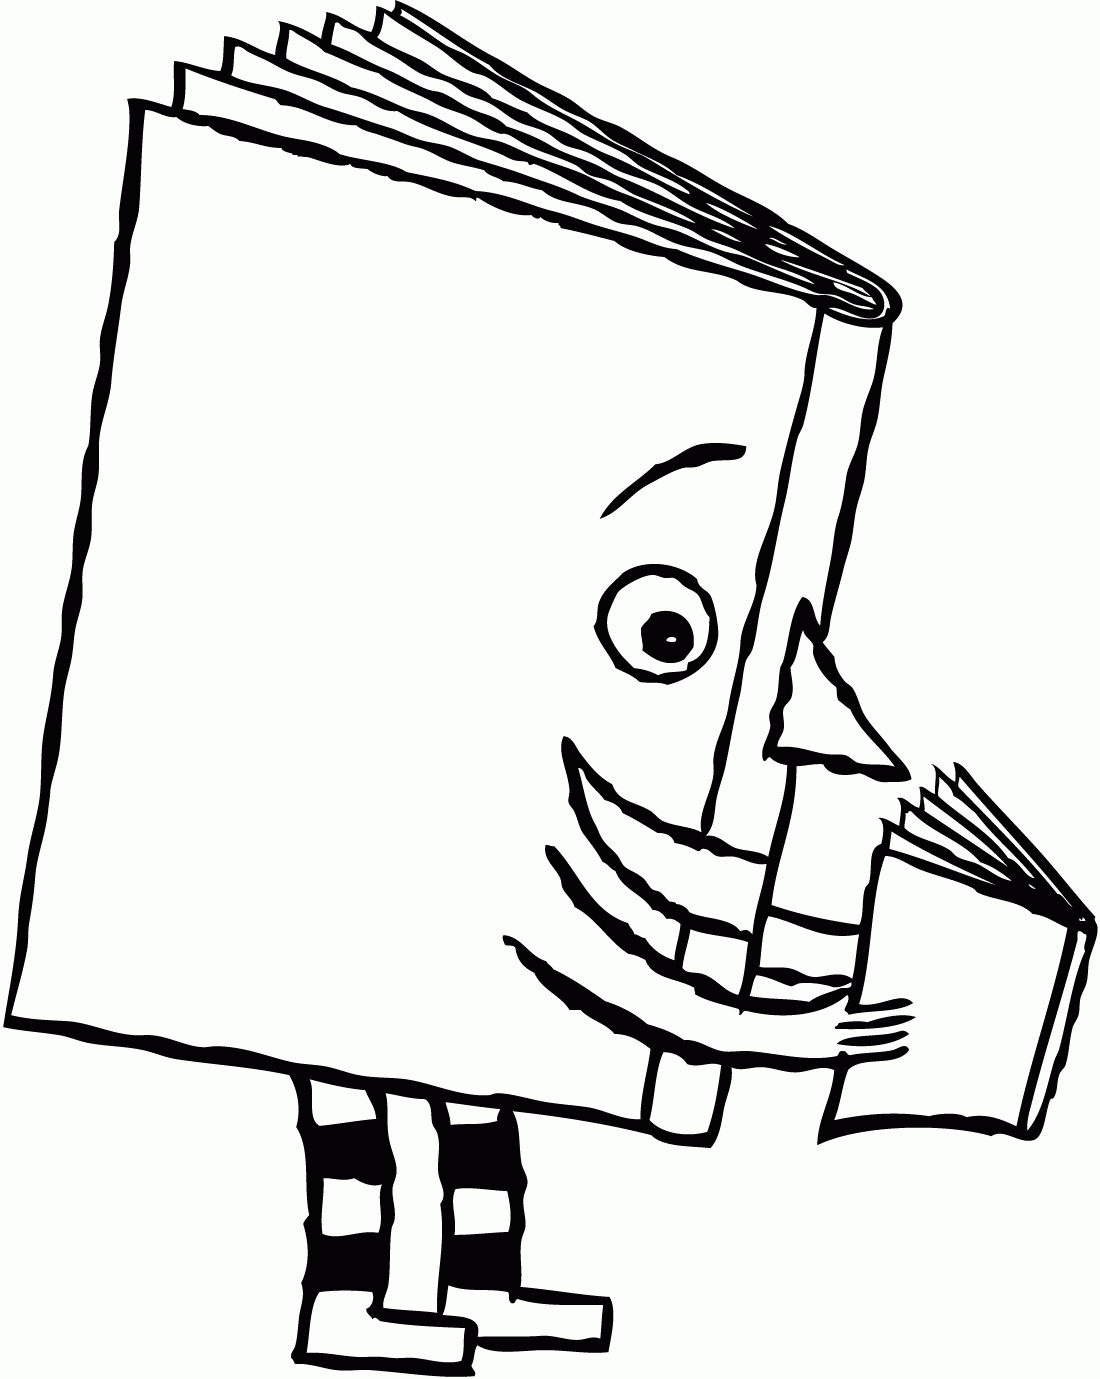 mo-willems-coloring-pages-4.jpg